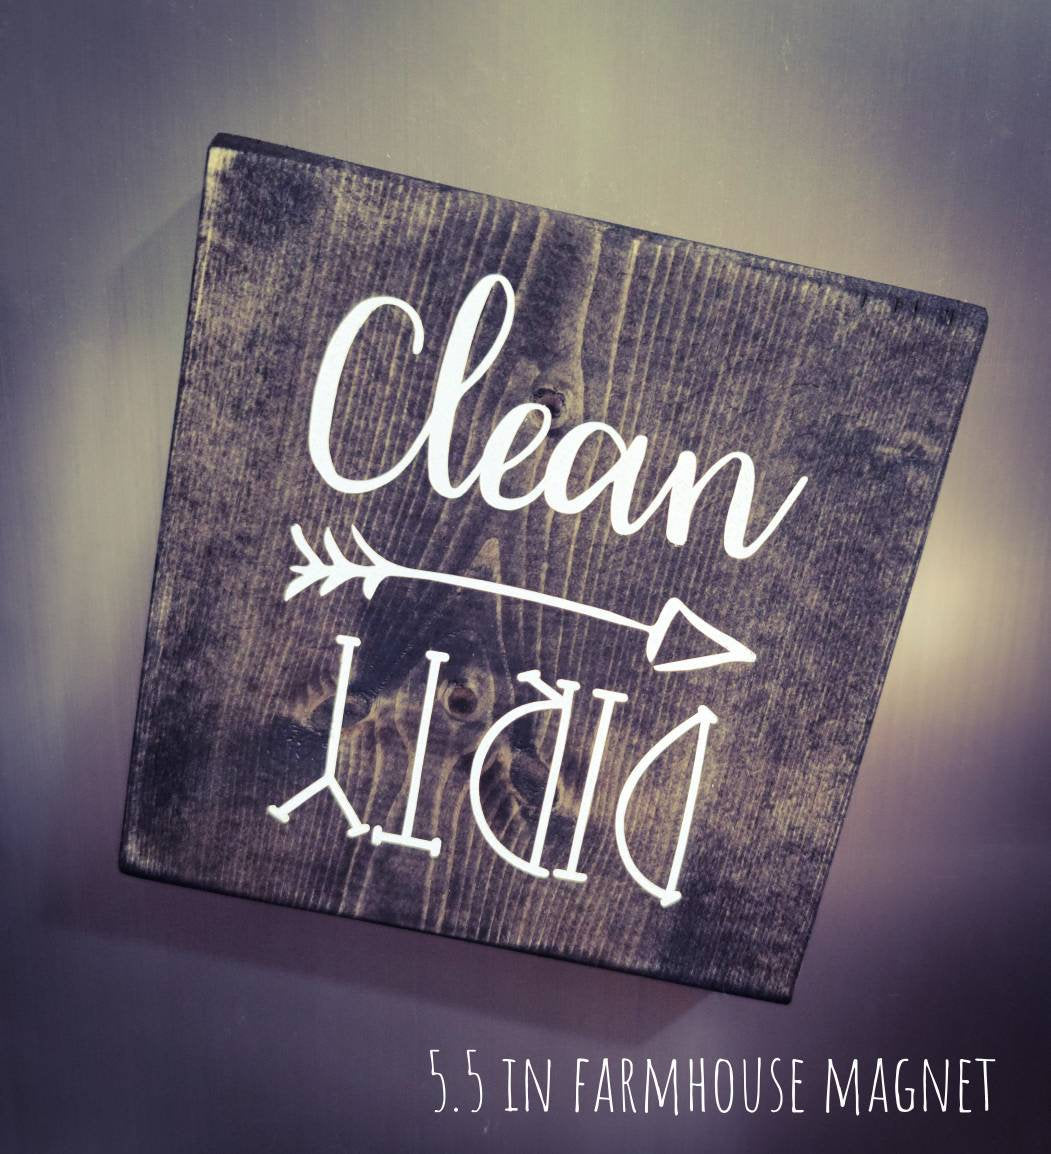 Clean Dirty Dishwasher magnet